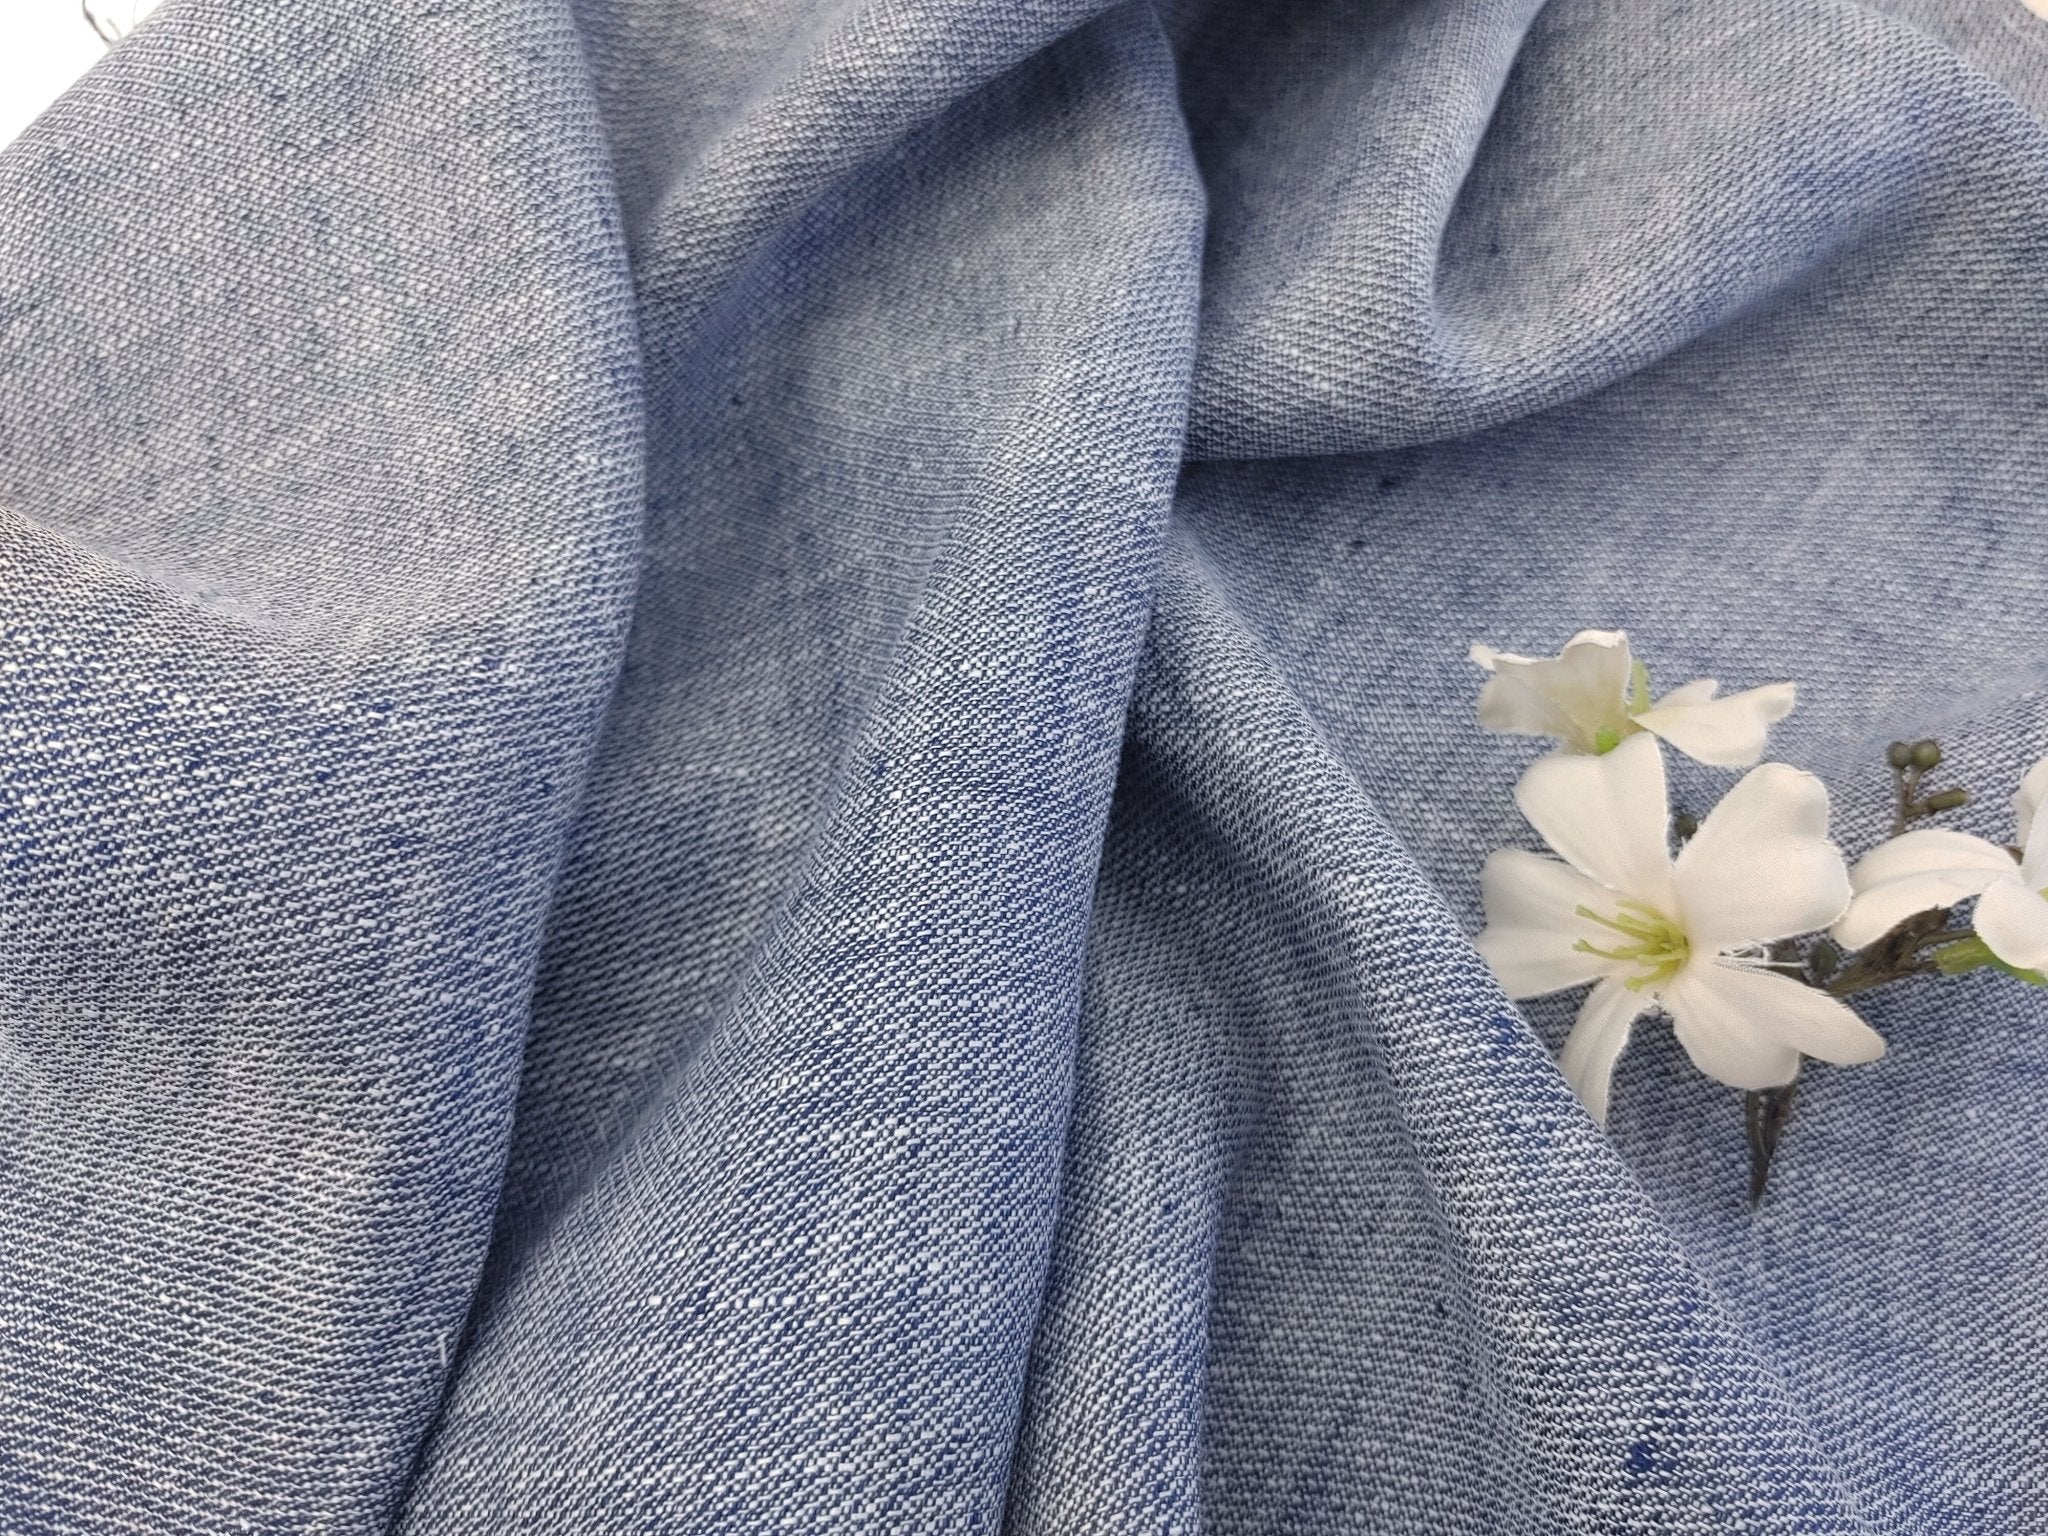 Two-Tone Blue Dobby Weave in 100% Linen Fabric 4688 - The Linen Lab - Blue